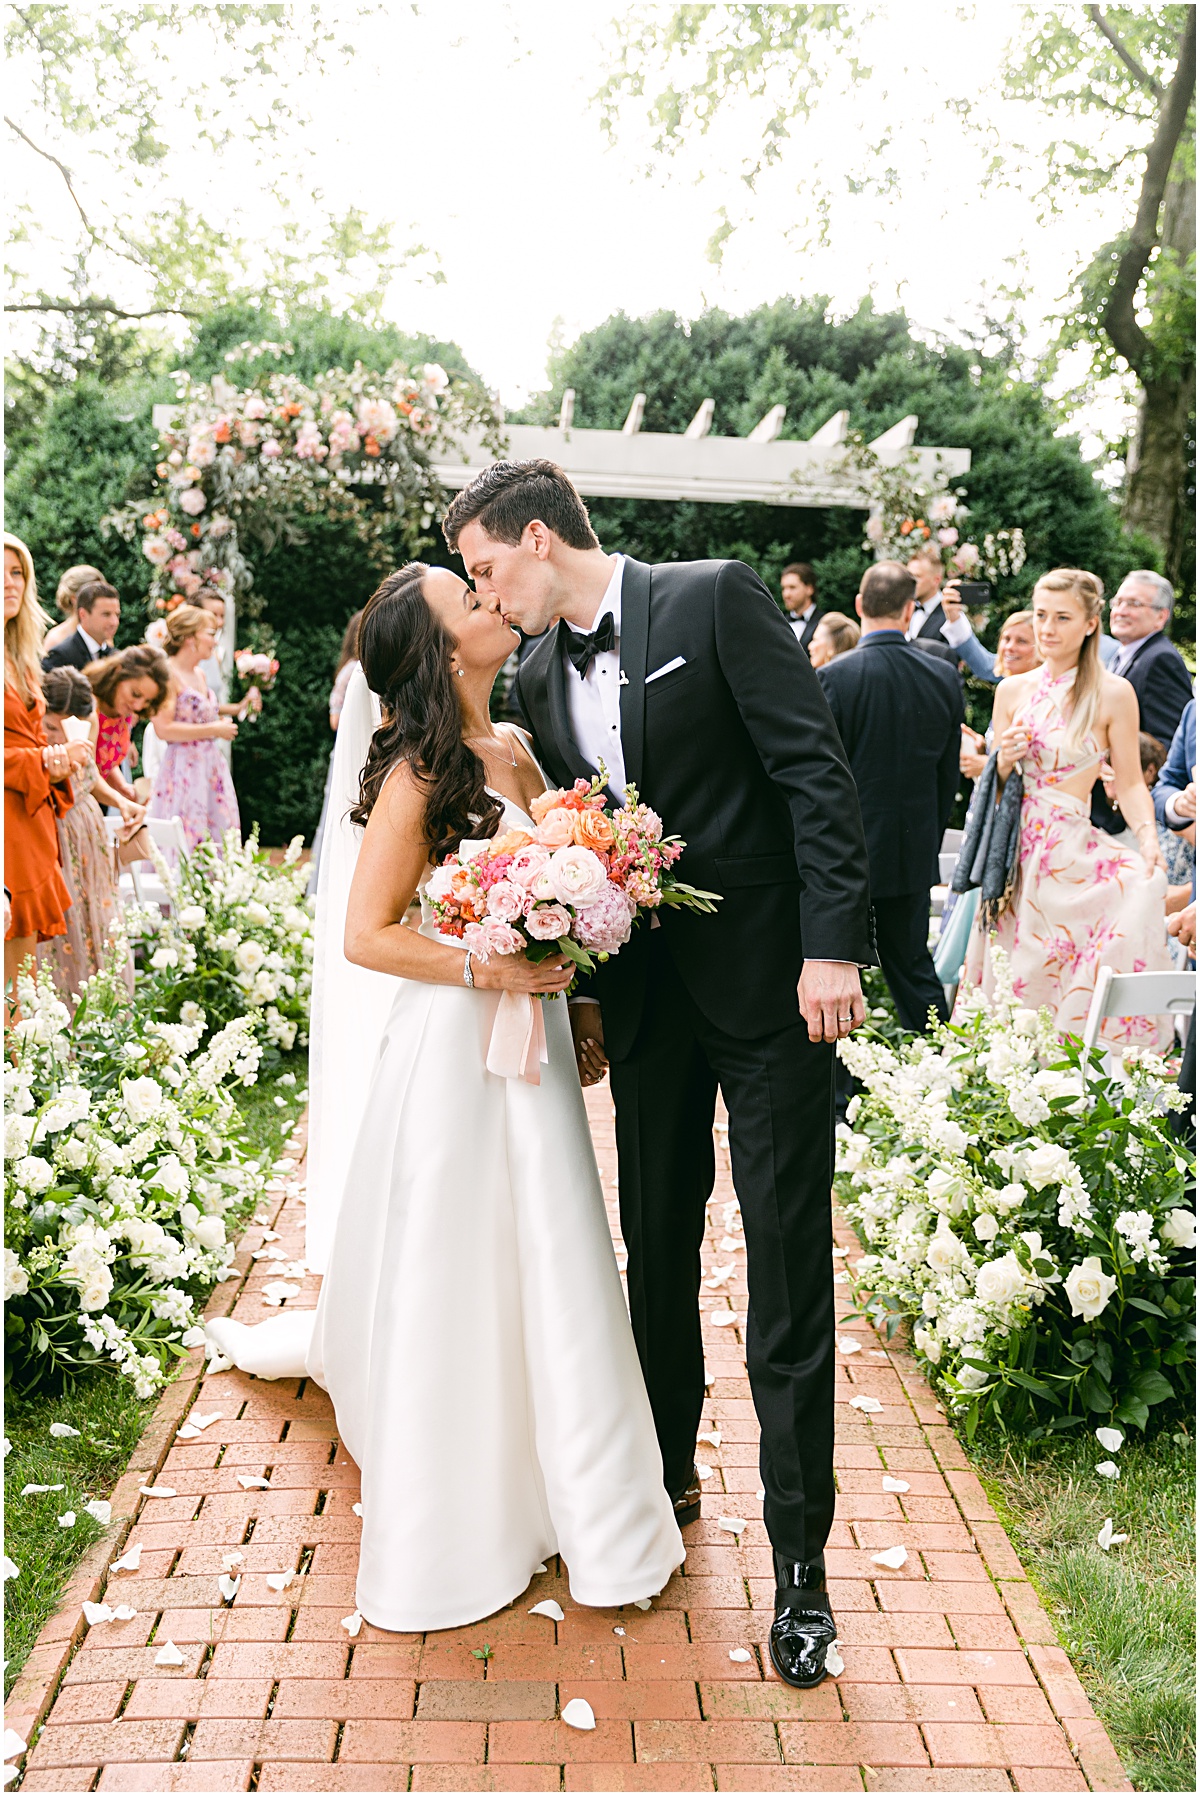 First Kiss as man and wife! Joyful summer wedding at the Inn at Willow Grove